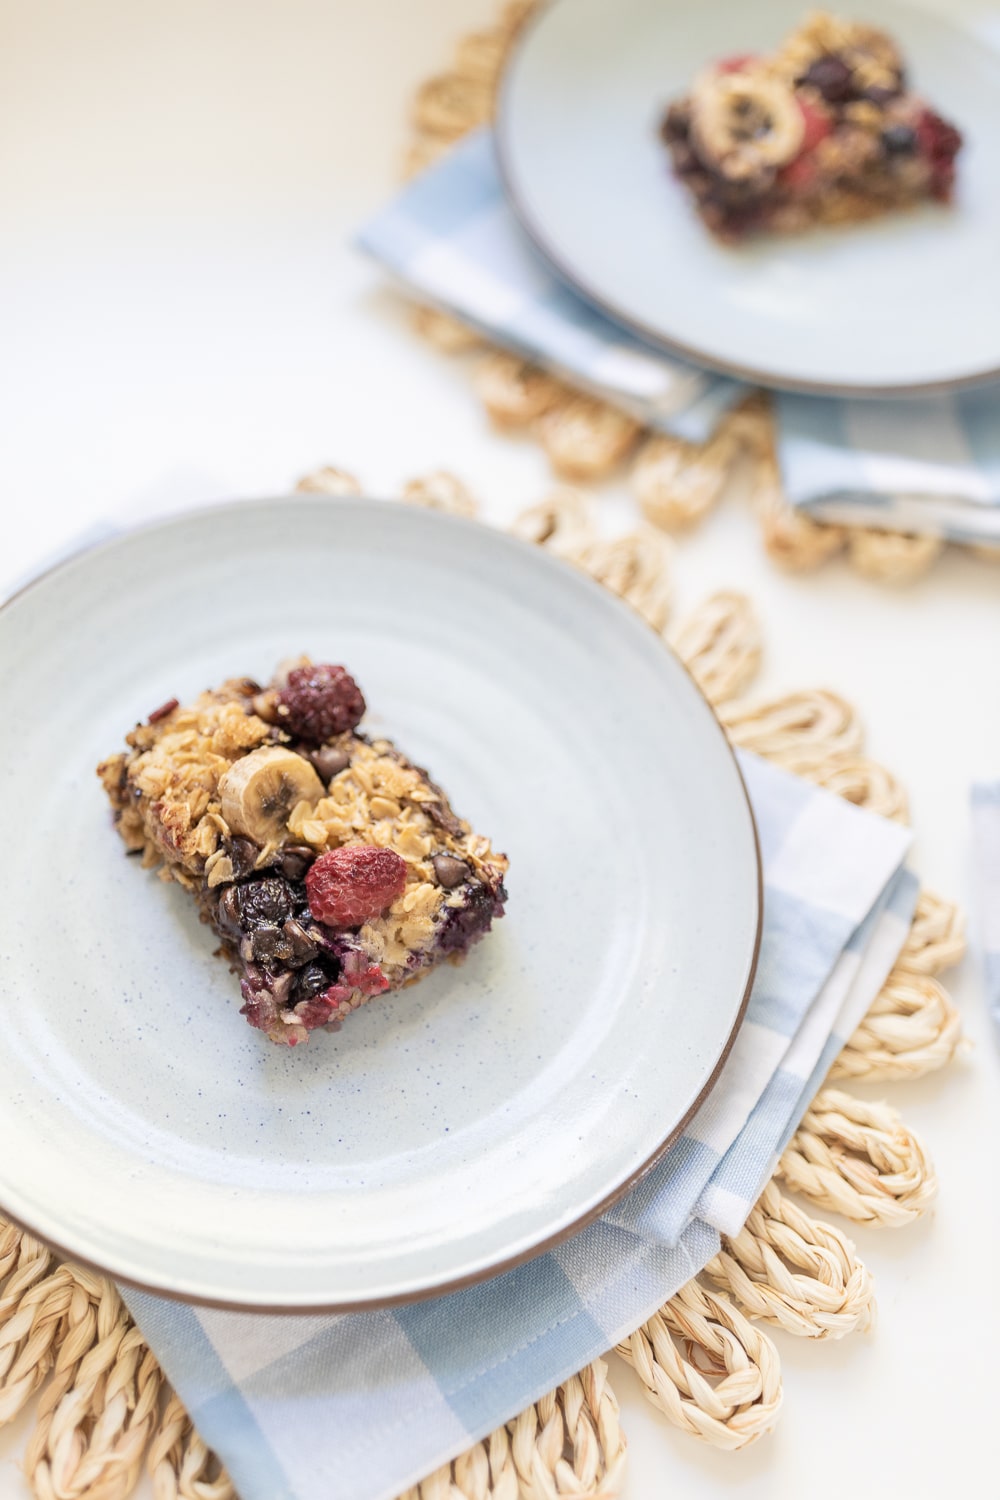 Blogger Stephanie Ziajka shares her recipe for baked berry oatmeal bars on Diary of a Debutante